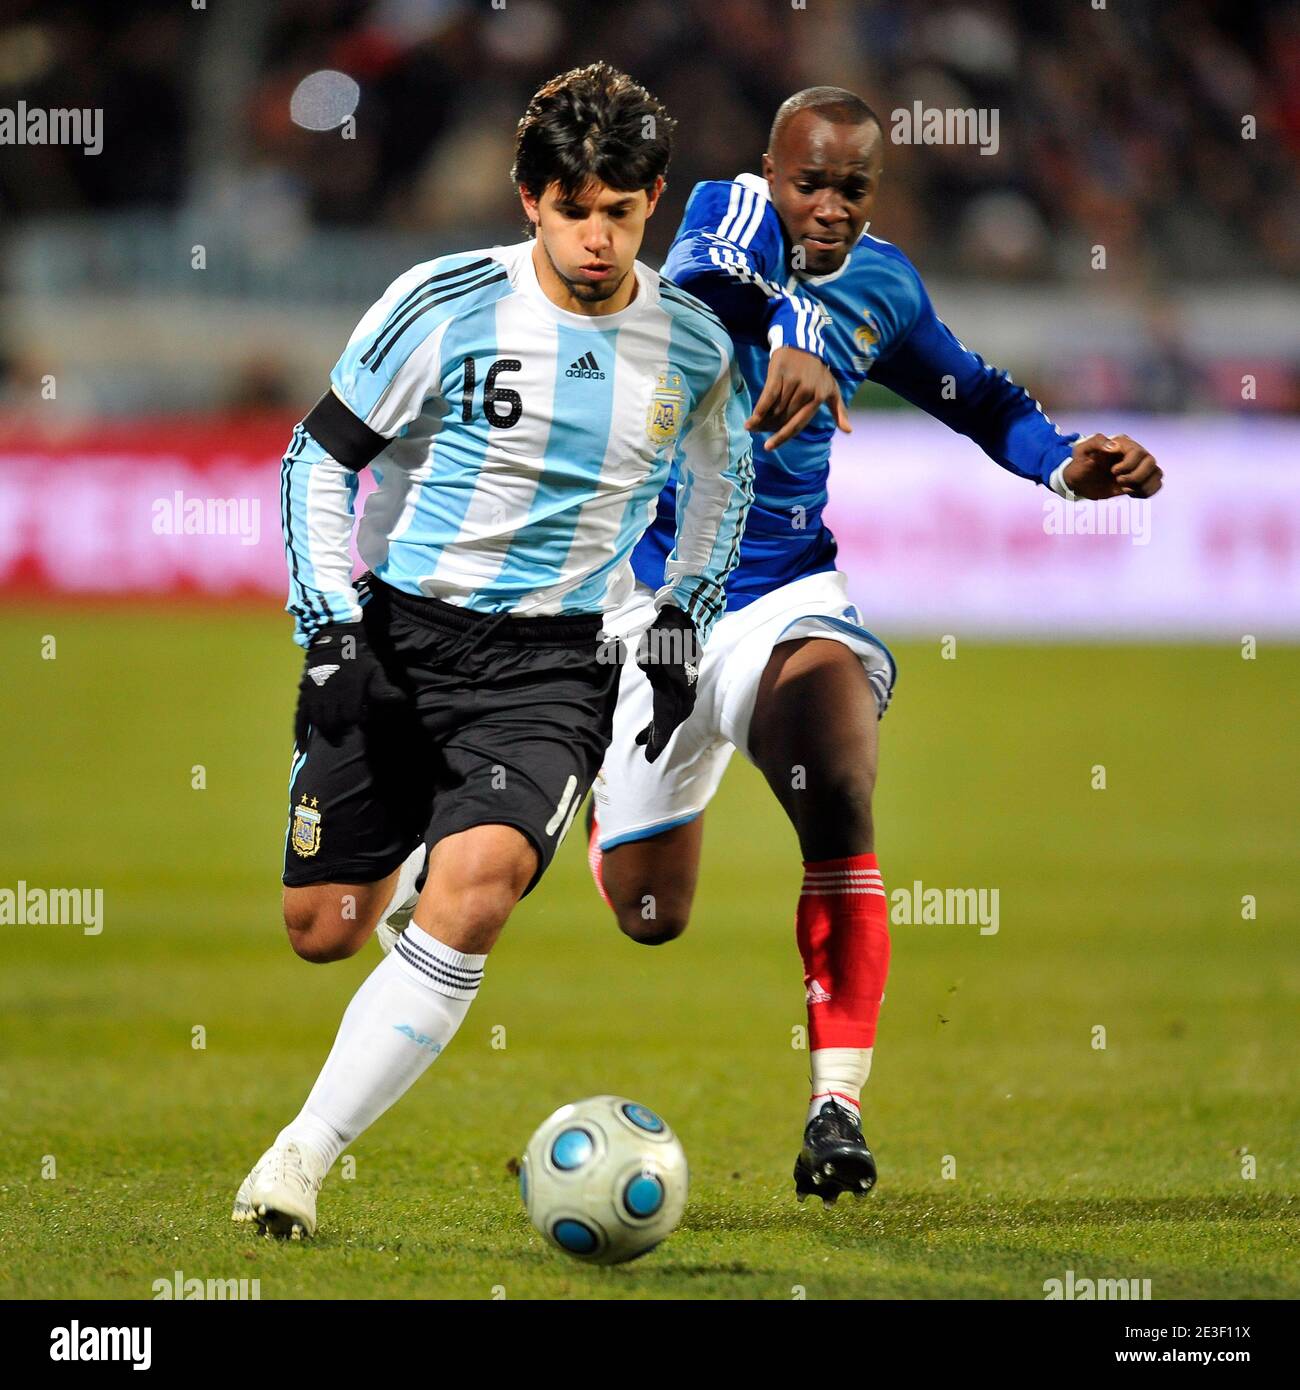 Argentina's Sergio Aguero and France's Lassana Diarra during the International Friendly Soccer match, France vs Argentina at the velodrome Stadium in Marseille, France on February 11, 2009. Argentina won 2-0. Photo by Stephane Reix/ABACAPRESS.COM Stock Photo